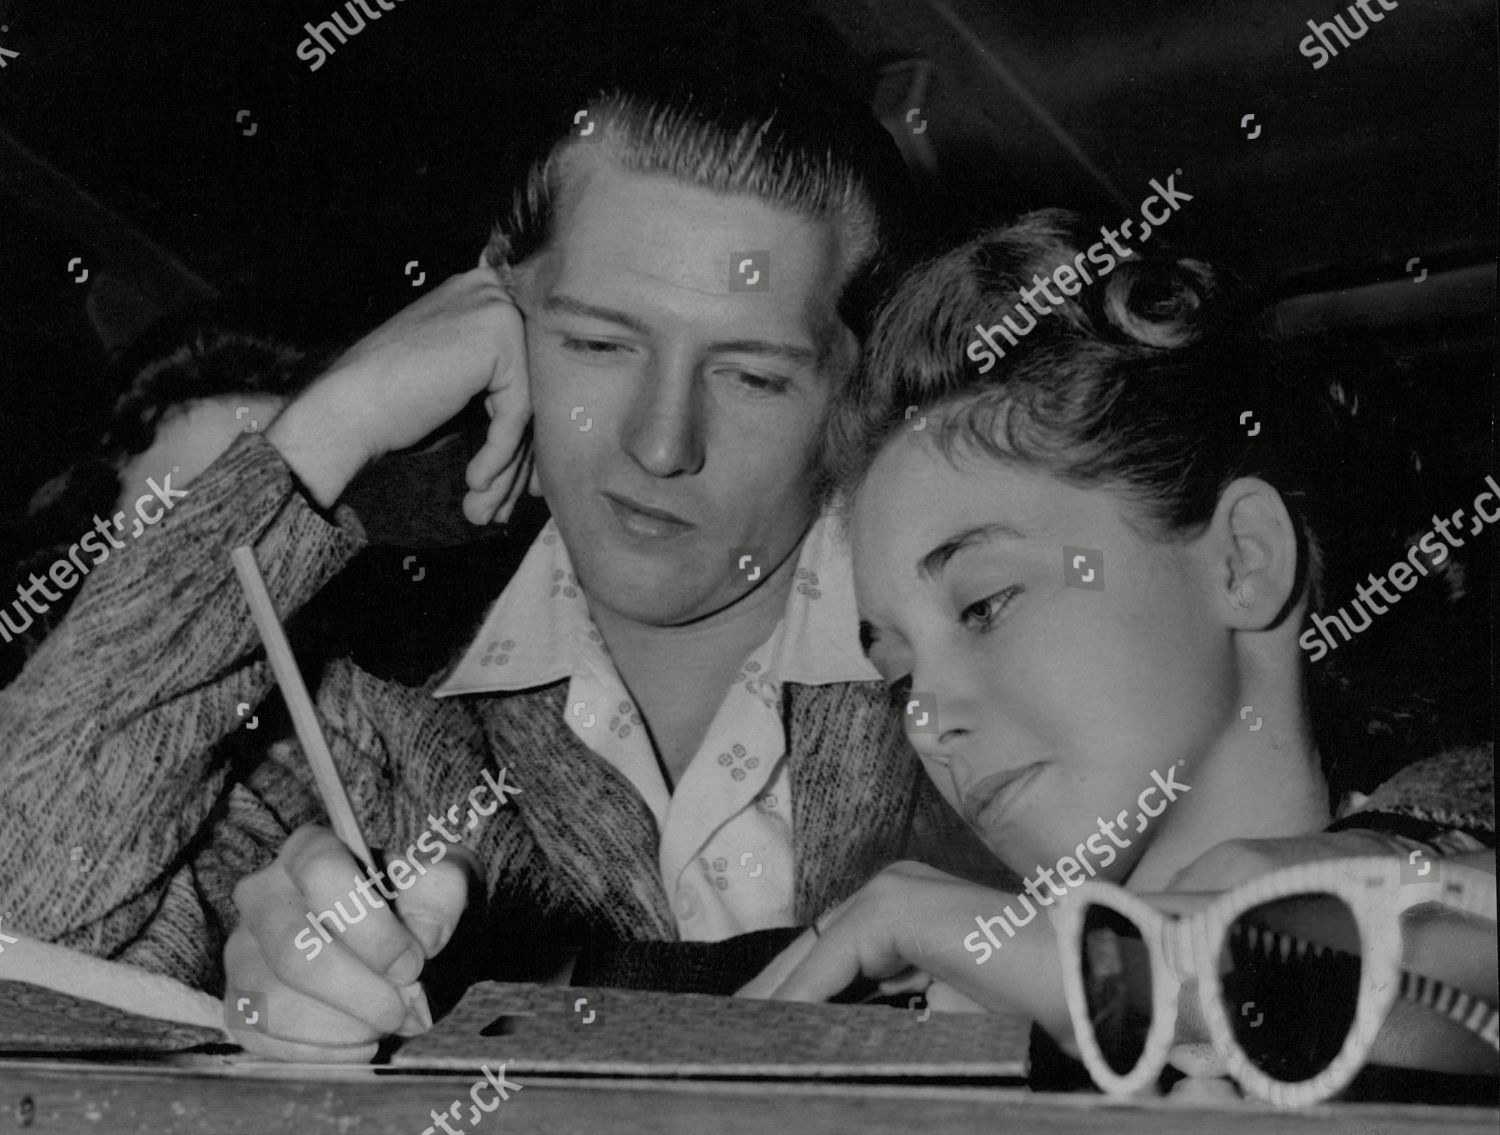 Singer Jerry Lee Lewis His 13yearold Editorial Stock Photo - Stock Image |  Shutterstock